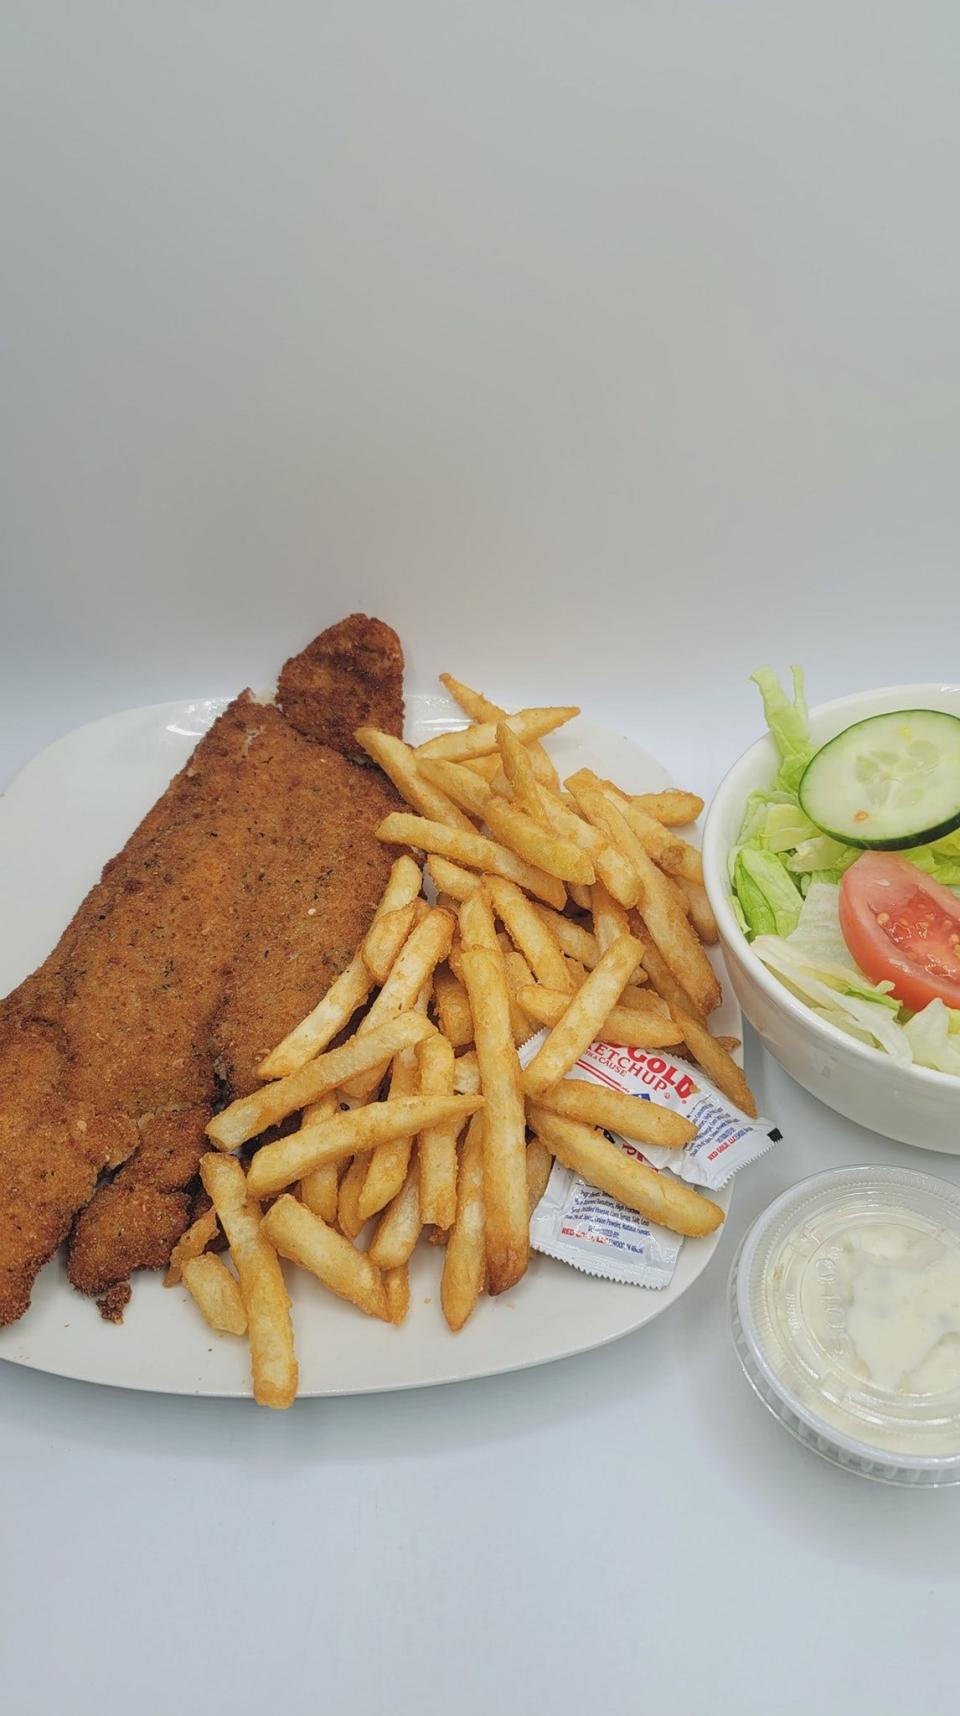 Can't go wrong with the fish and chips at Timo's Pizza.